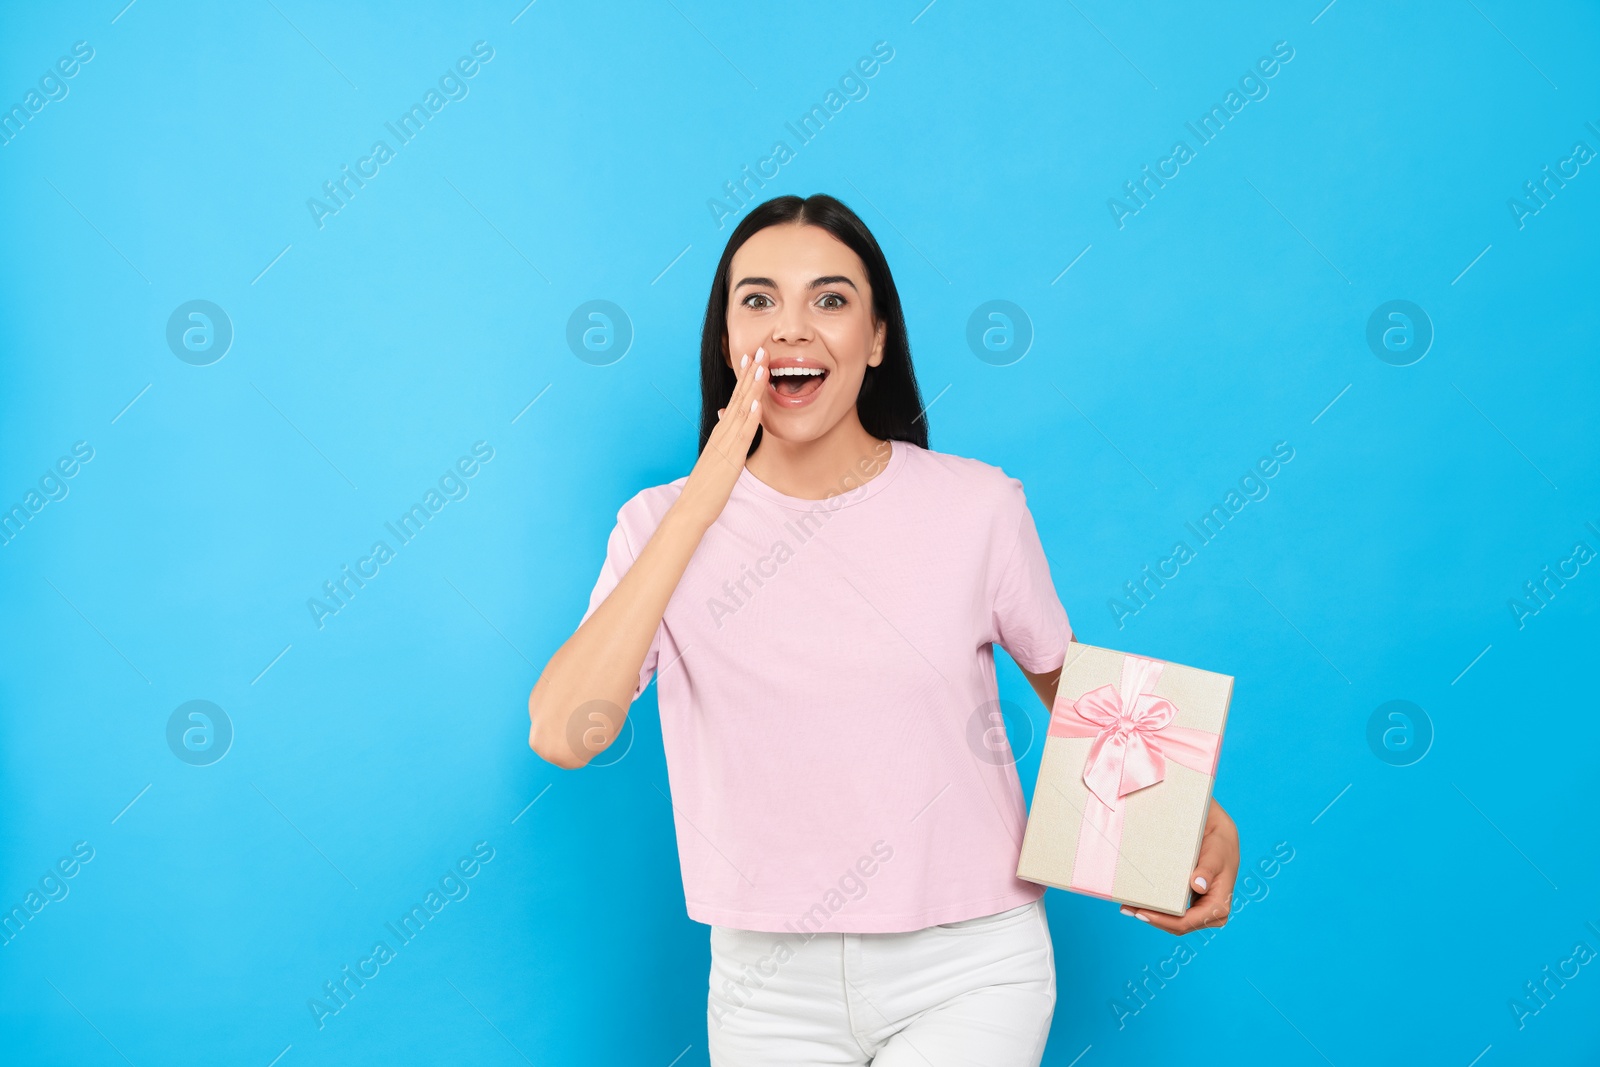 Photo of Emotional young woman holding gift box on light blue background